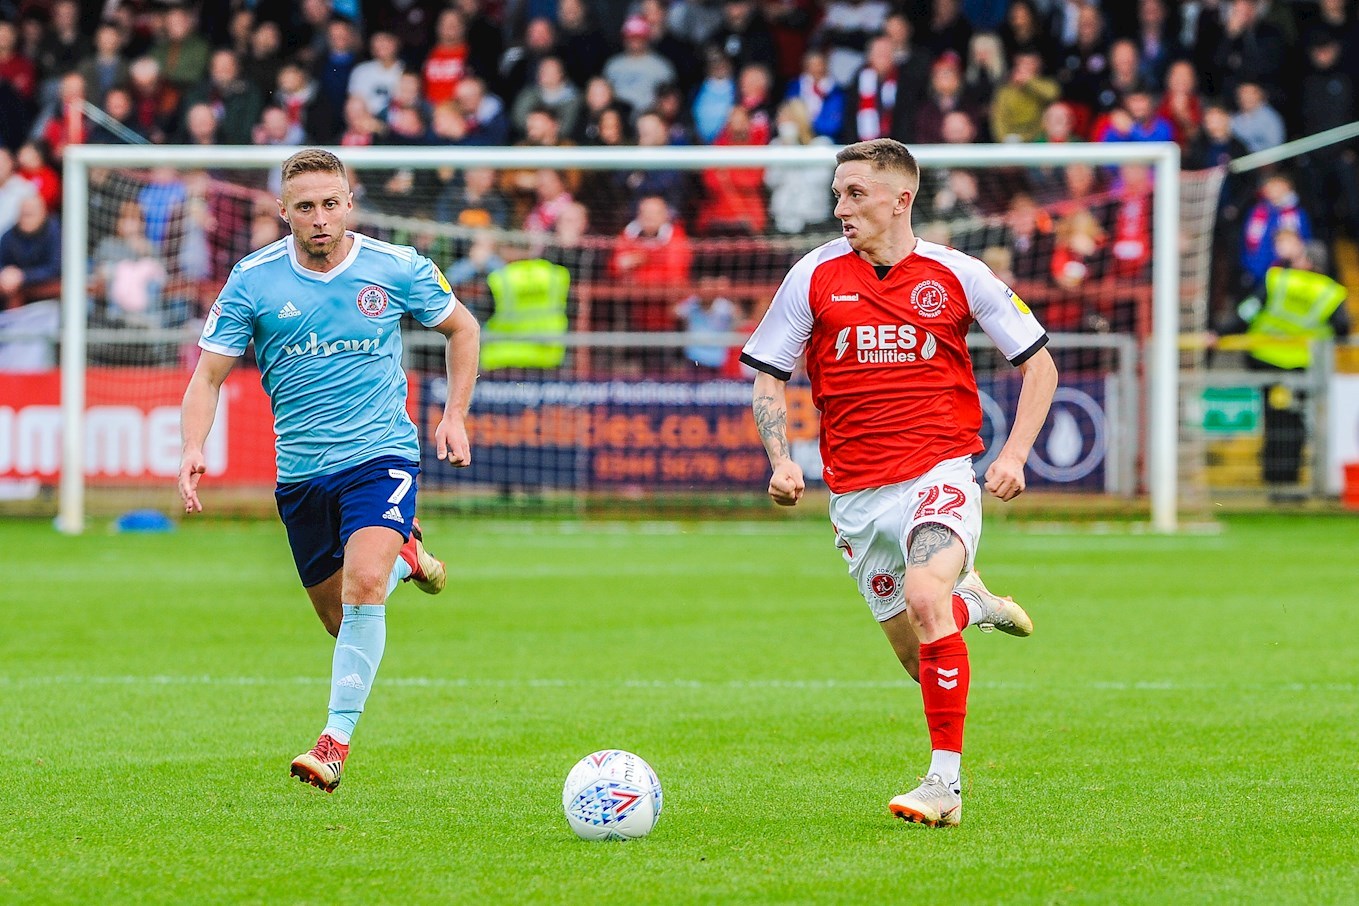 Fleetwood Town's forward Ash Hunter (22) during the Sky Bet League 1 match between Fleetwood Town and Accrington Stanley at Highbury Stadium, Fleetwood, England on 15 September 2018. Photo by Stephen Buckley / PRiME Media Images.